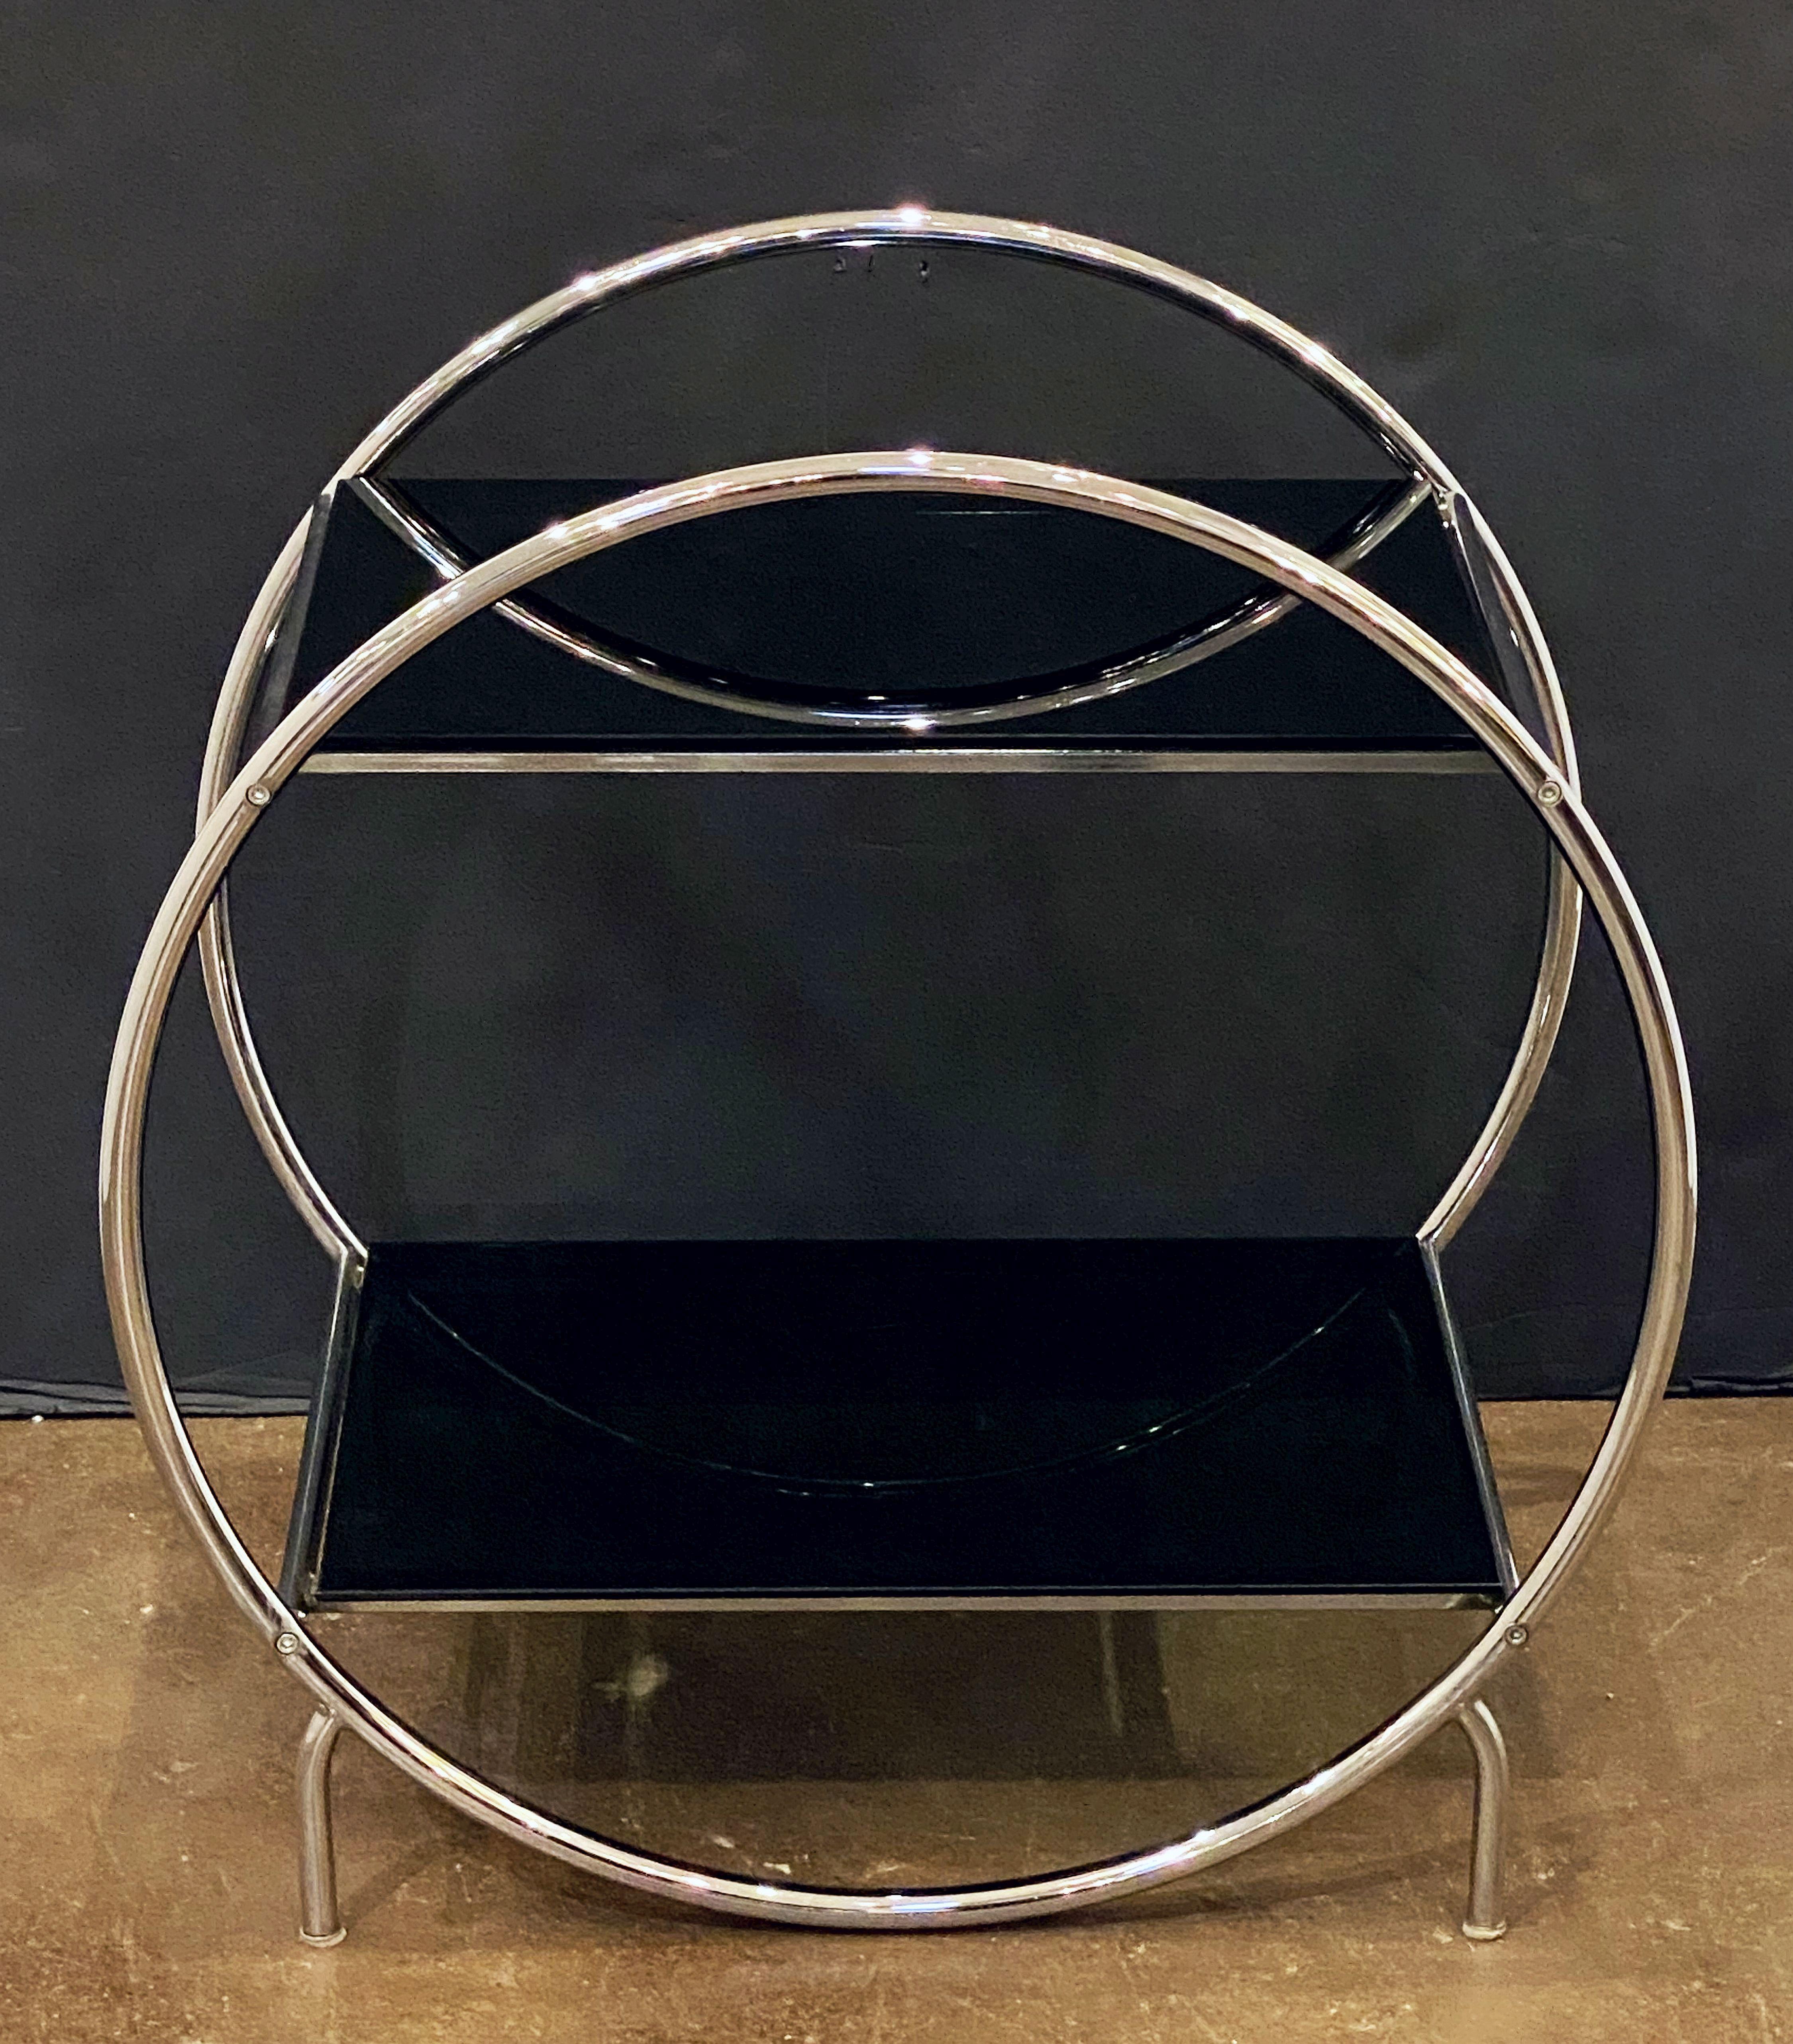 A fine Czech modernist table from the Art Deco period by the celebrated furniture producer, Slezákovy Závody, featuring two tiers of smoked black glass, set upon a stylish tubular chrome frame.



             